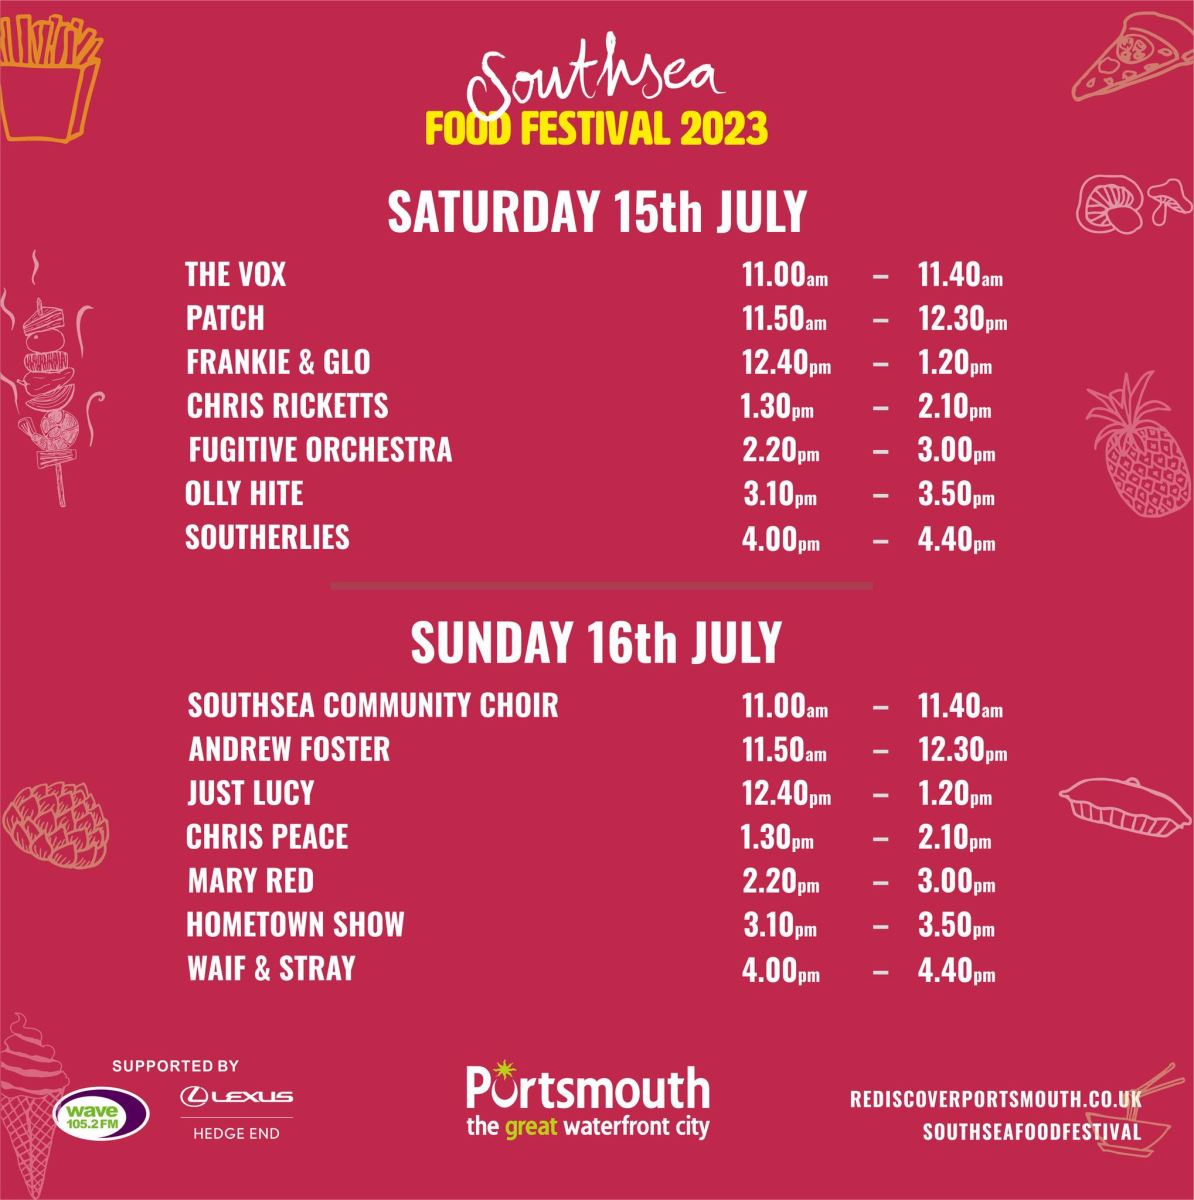 Southsea Food Festival bands line-up, featuring The Vox, Patch, Frankie & Glo, Chris Ricketts, Fugitive Orchestra, Olly Hite, Southerlies, Southsea Community Choir, Andrew Foster, Just Lucy, Chris Peace, Mary Red, Hometown Show, and Waif & Stray